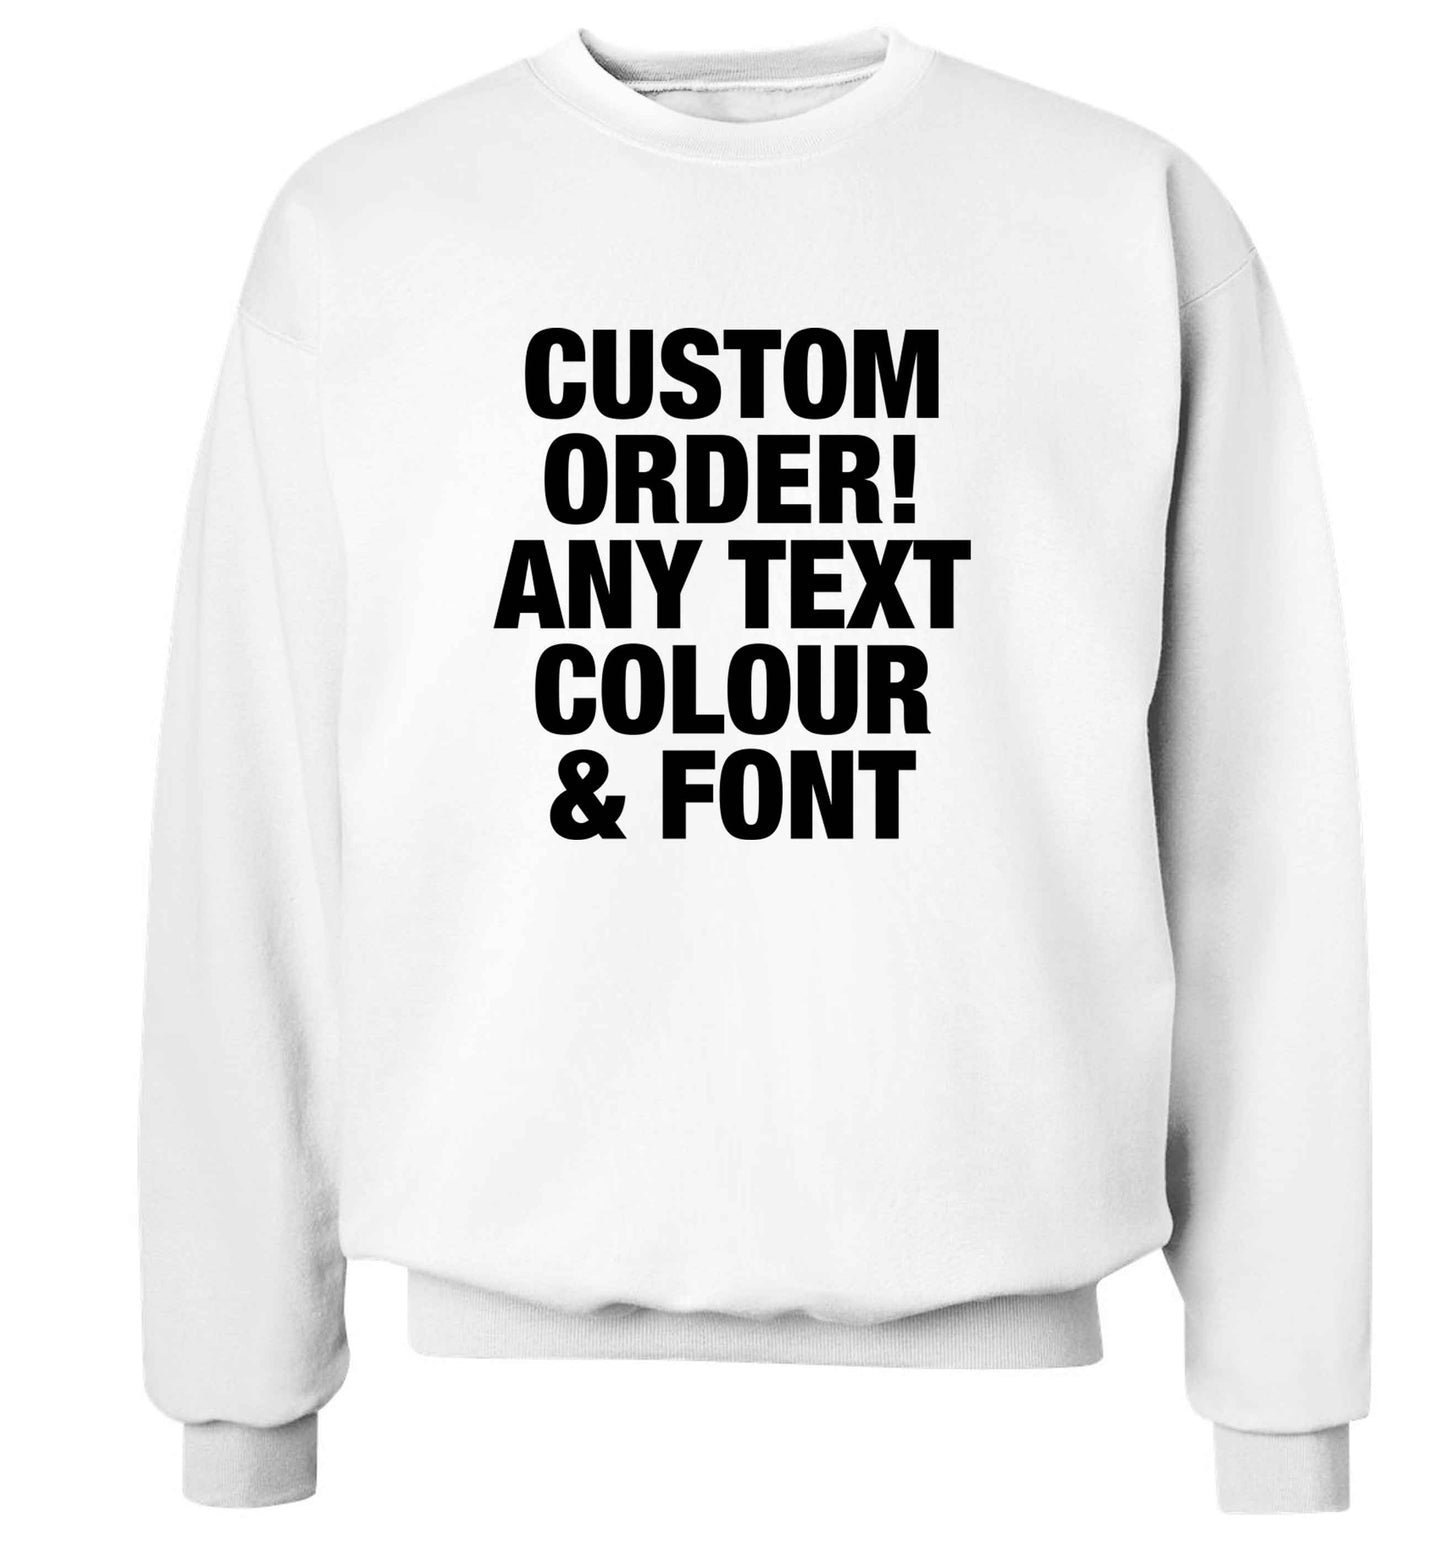 Custom order any text colour and font adult's unisex white sweater 2XL